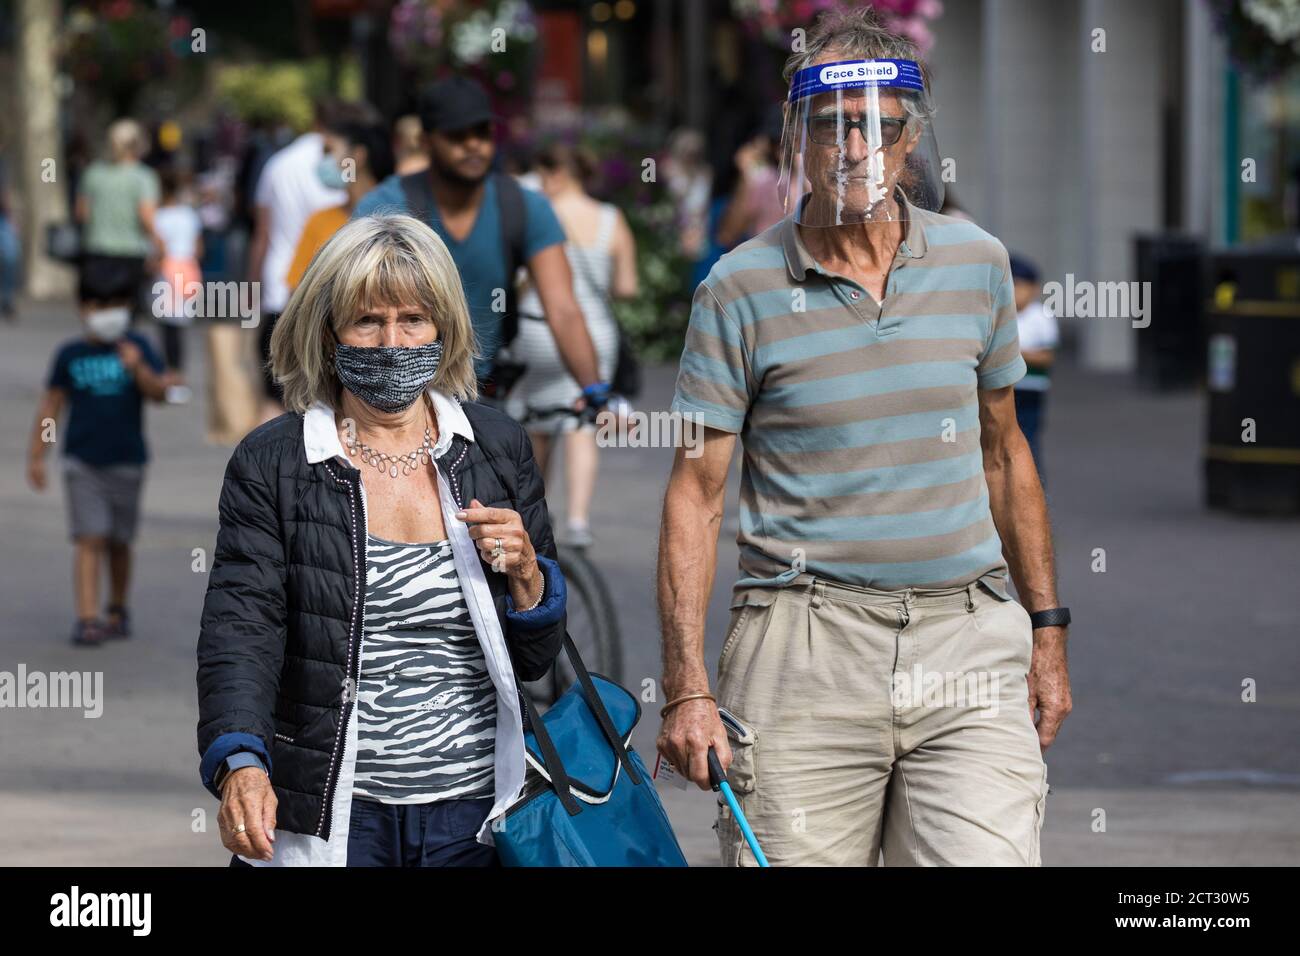 Staines-upon-Thames, UK. 20th September, 2020. Shoppers wear face coverings and a visor to help prevent the spread of the coronavirus. The Borough of Spelthorne, of which Staines-upon-Thames forms part along with Ashford, Sunbury-upon-Thames, Stanwell, Shepperton and Laleham, has been declared an Ôarea of concernÕ for COVID-19 by the government following a marked rise in coronavirus infections which is inconsistent with other areas of Surrey. Credit: Mark Kerrison/Alamy Live News Stock Photo